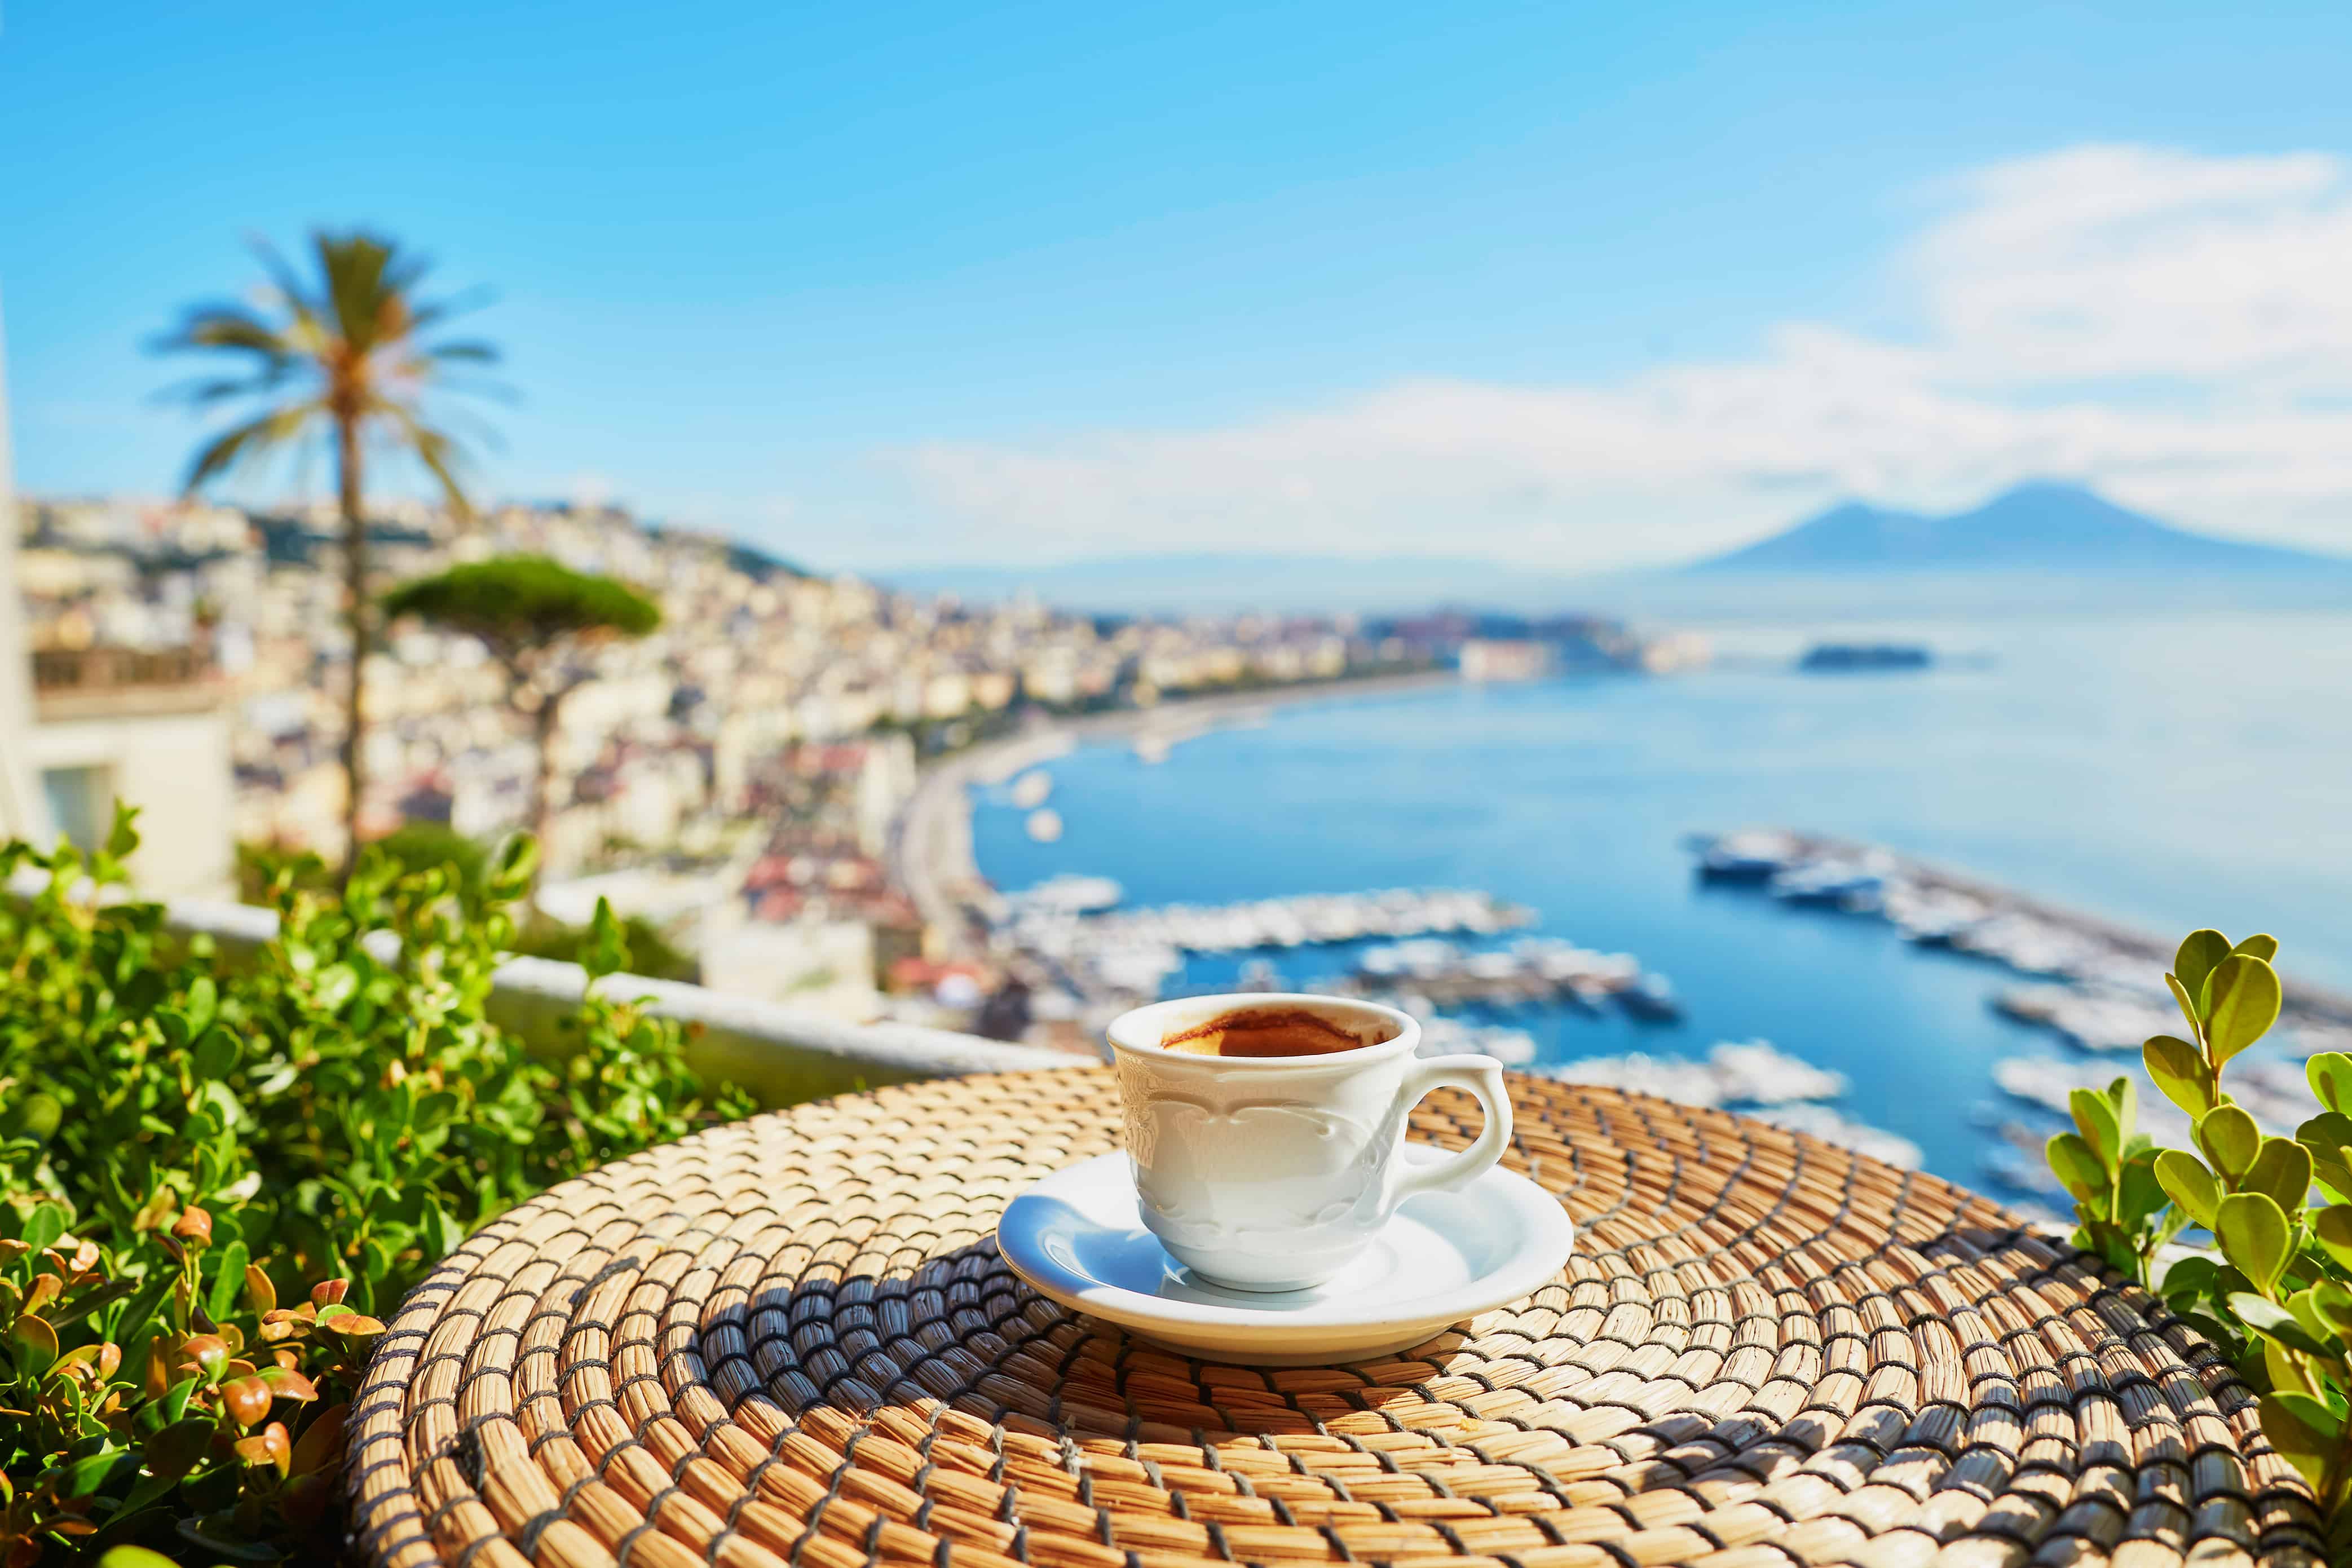 Travel is like a cup of coffee